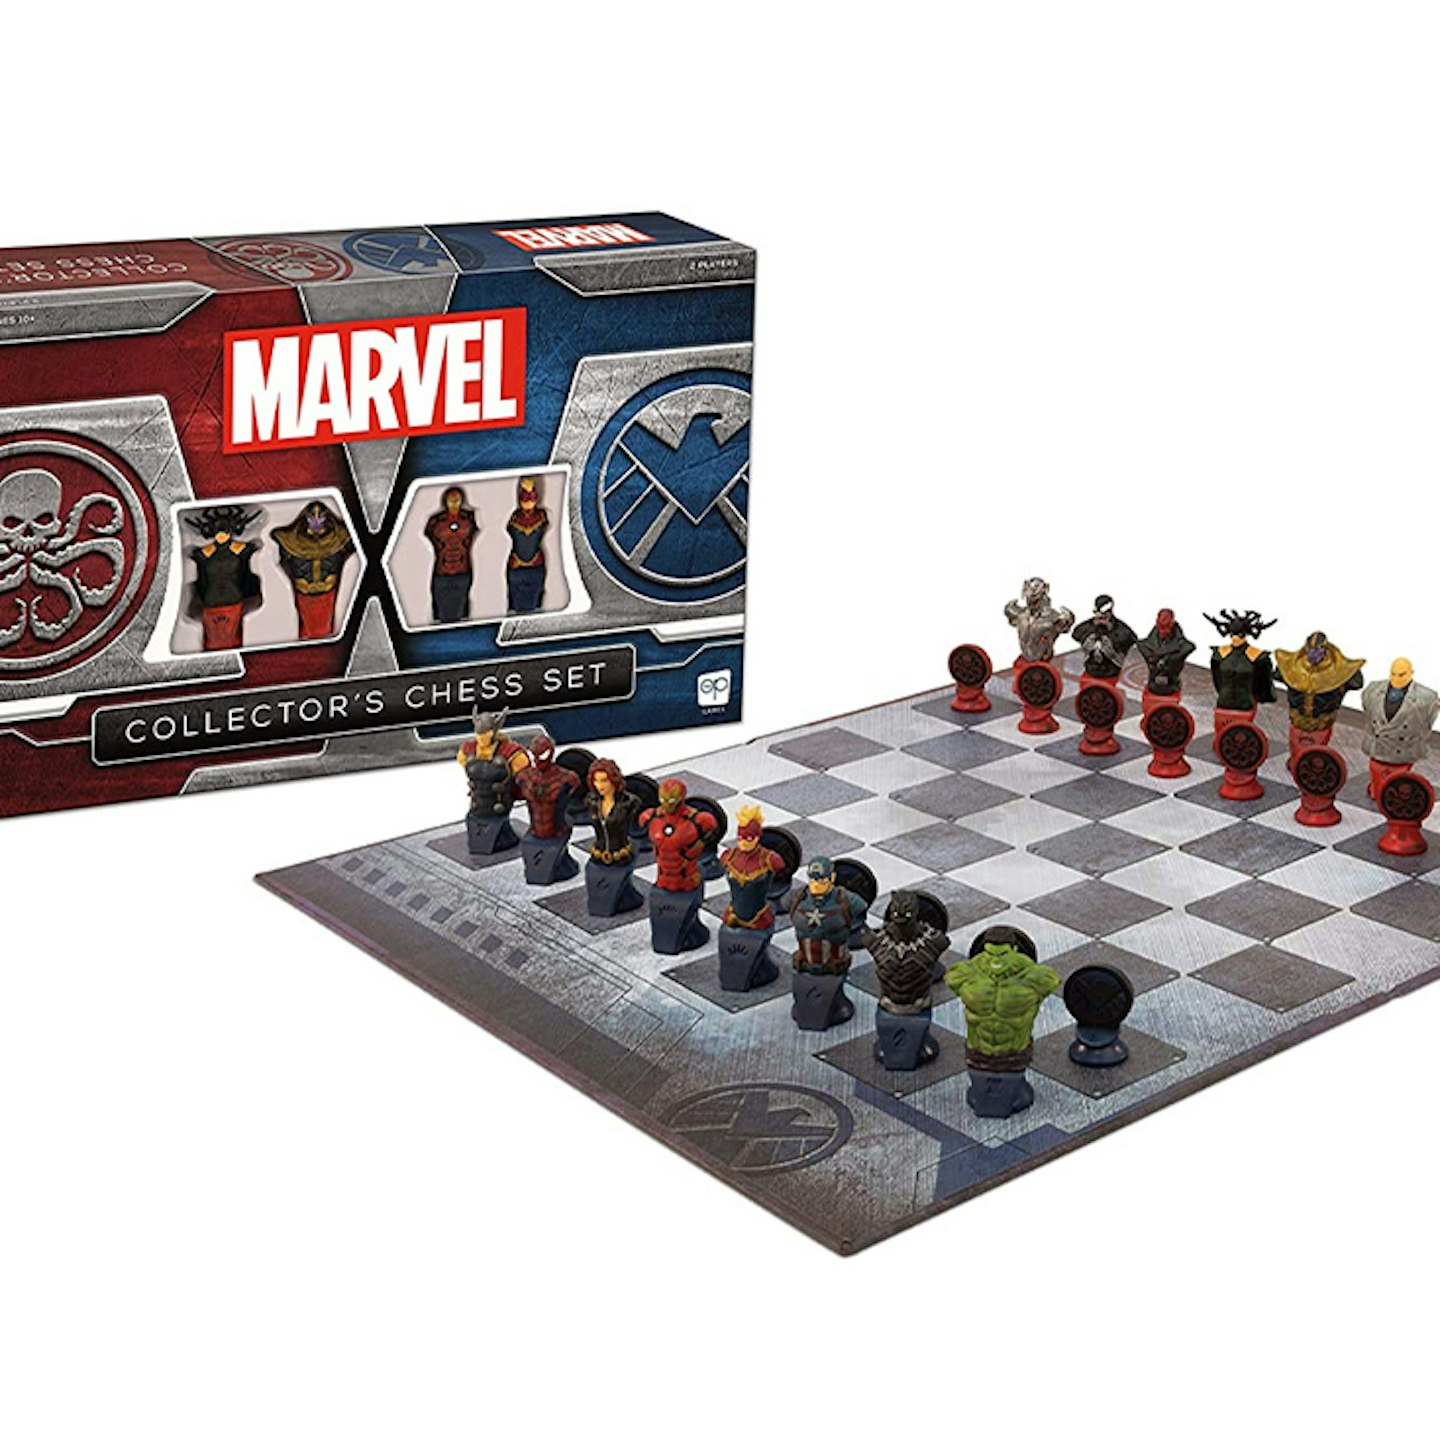 Marvel Collector's Chess Set